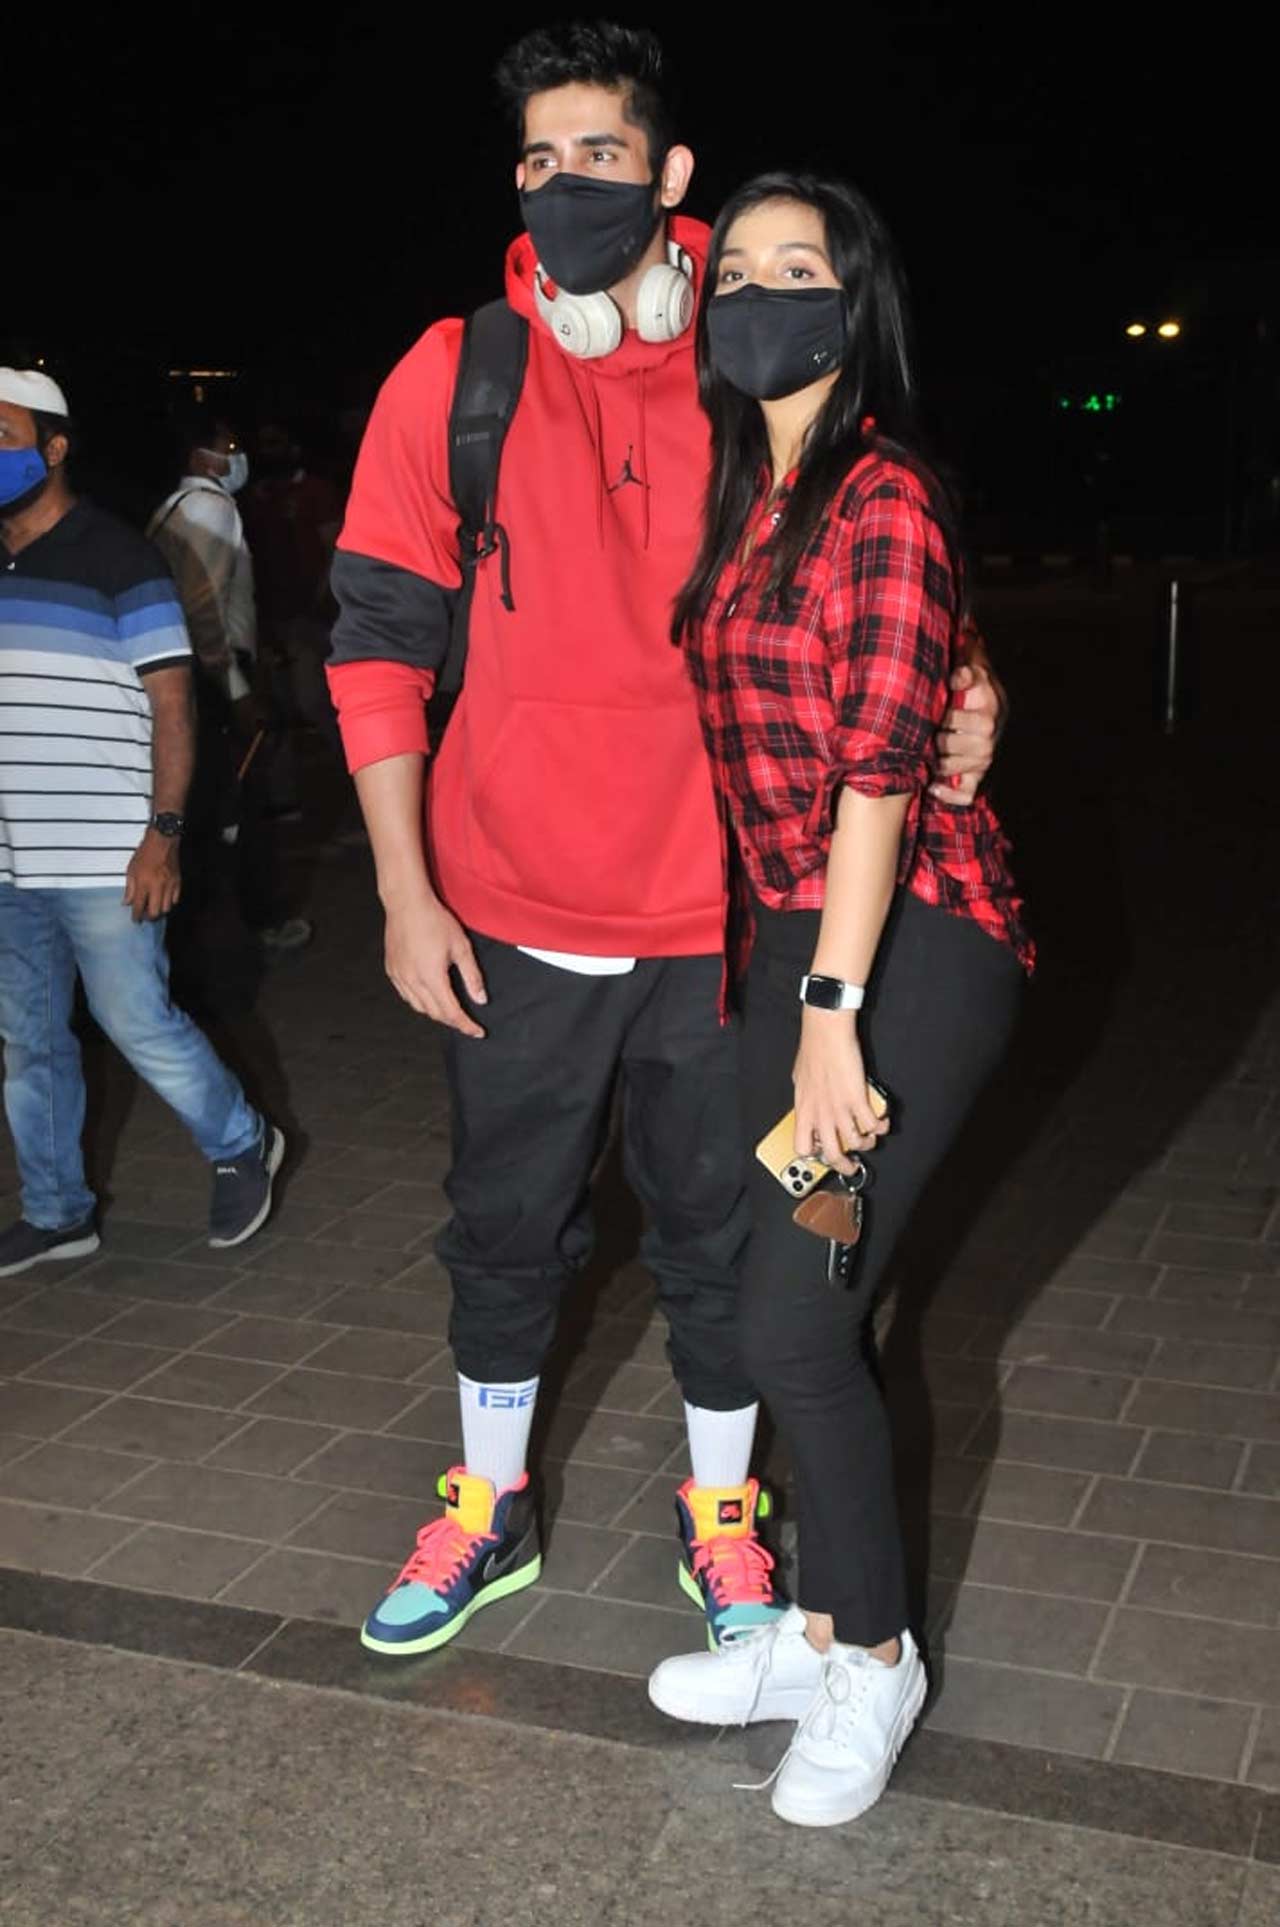 Varun Sood and Divya Agarwal also posed for the shutterbugs when snapped twinning in a red and black outfit at the Mumbai airport. 